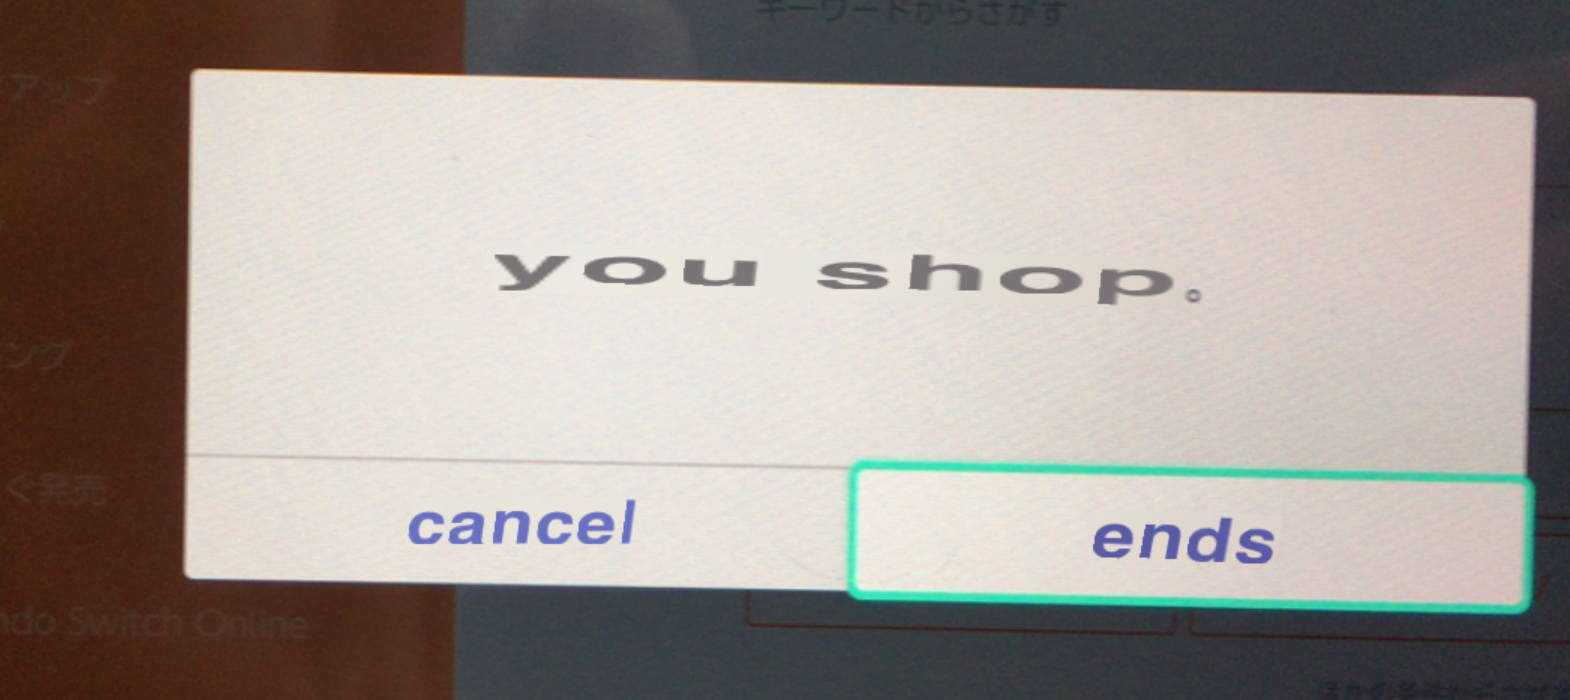 Screenshot showing a Google Translate interpretation of the shop exit confirmation dialog with the right-hand button translated as ends.